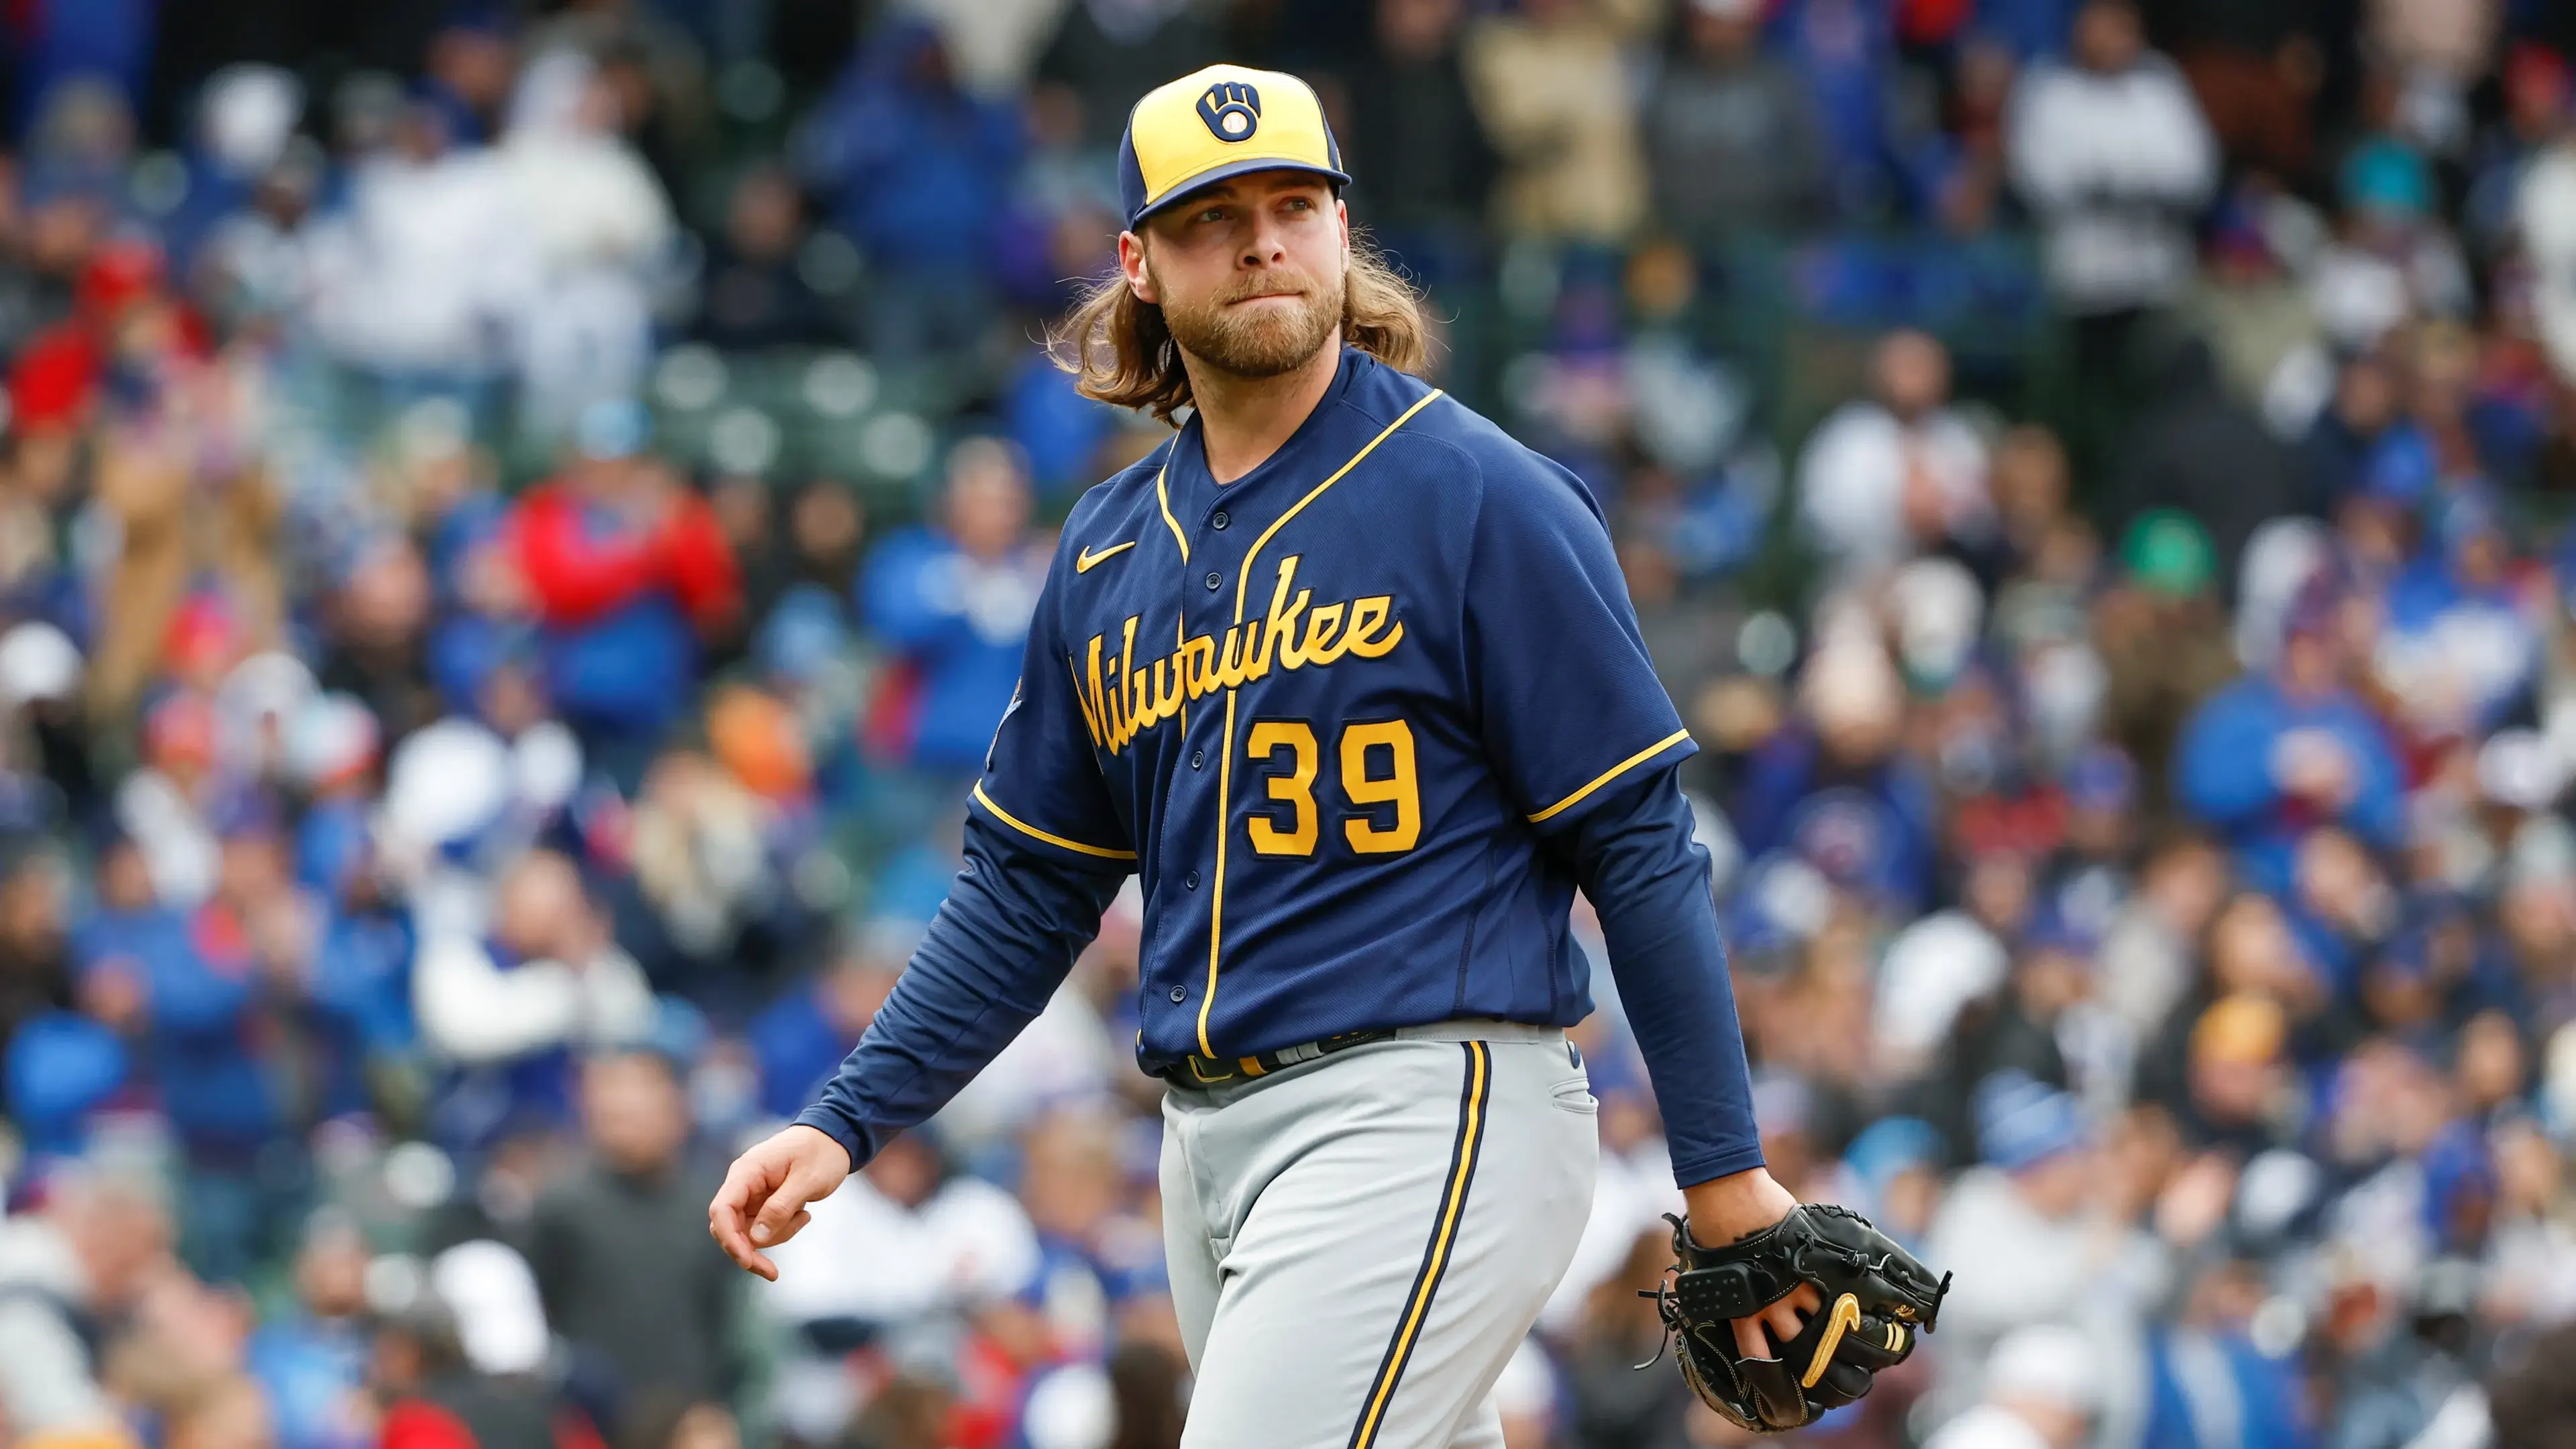 Mar 30, 2023; Chicago, Illinois, USA; Milwaukee Brewers starting pitcher Corbin Burnes (39) walks back to dugout after delivering against the Chicago Cubs during the third inning at Wrigley Field. Mandatory Credit: Kamil Krzaczynski-USA TODAY Sports / © Kamil Krzaczynski-USA TODAY Sports